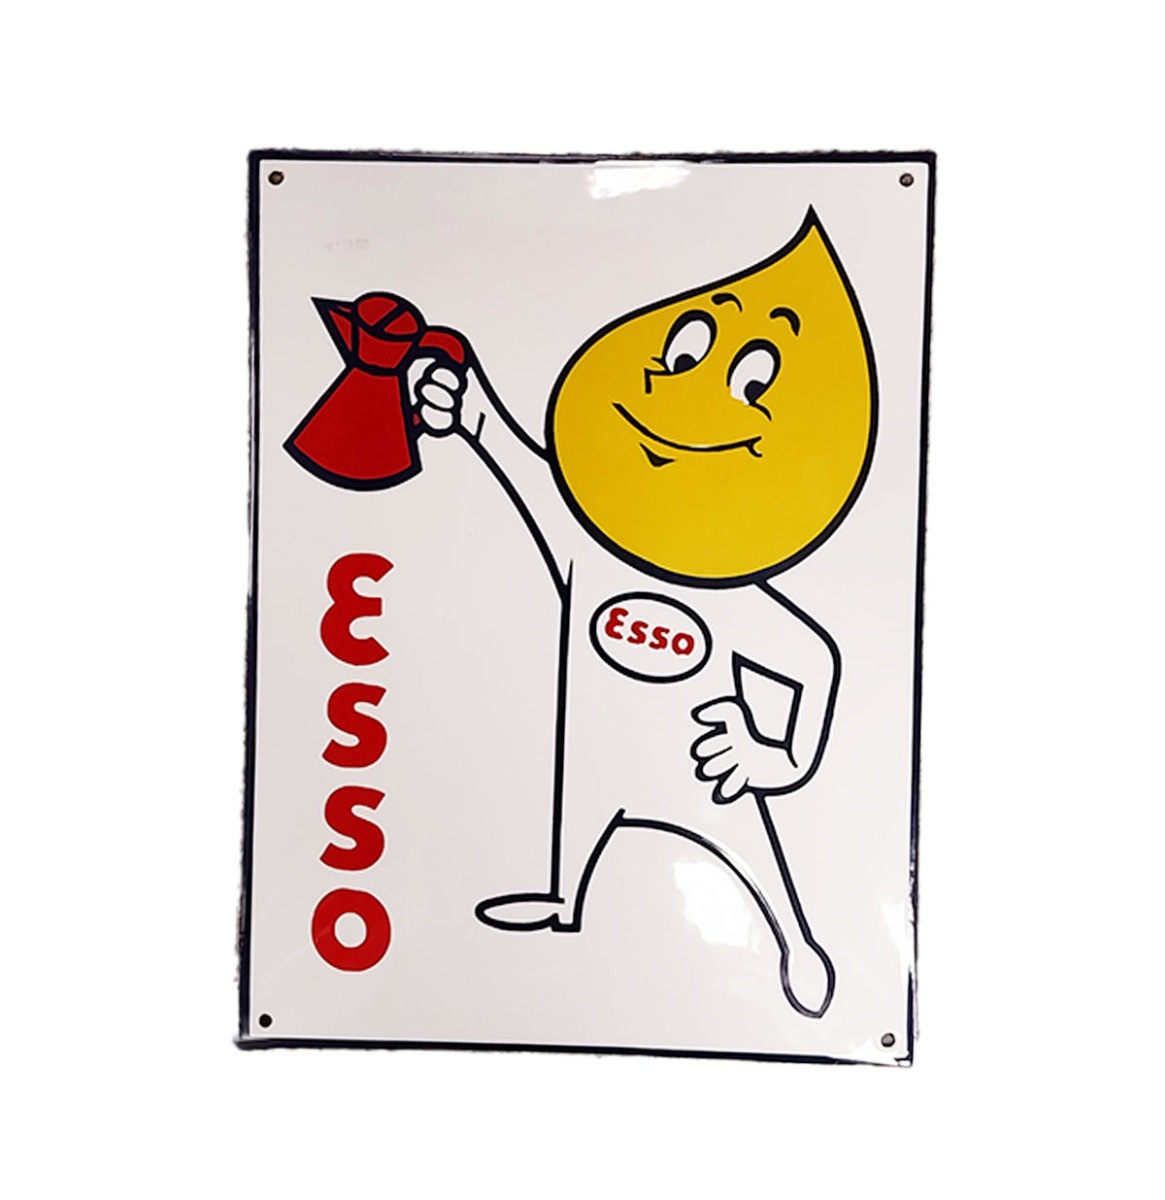 Esso Man Oliekan Emaille Bord - 40 x 30cm